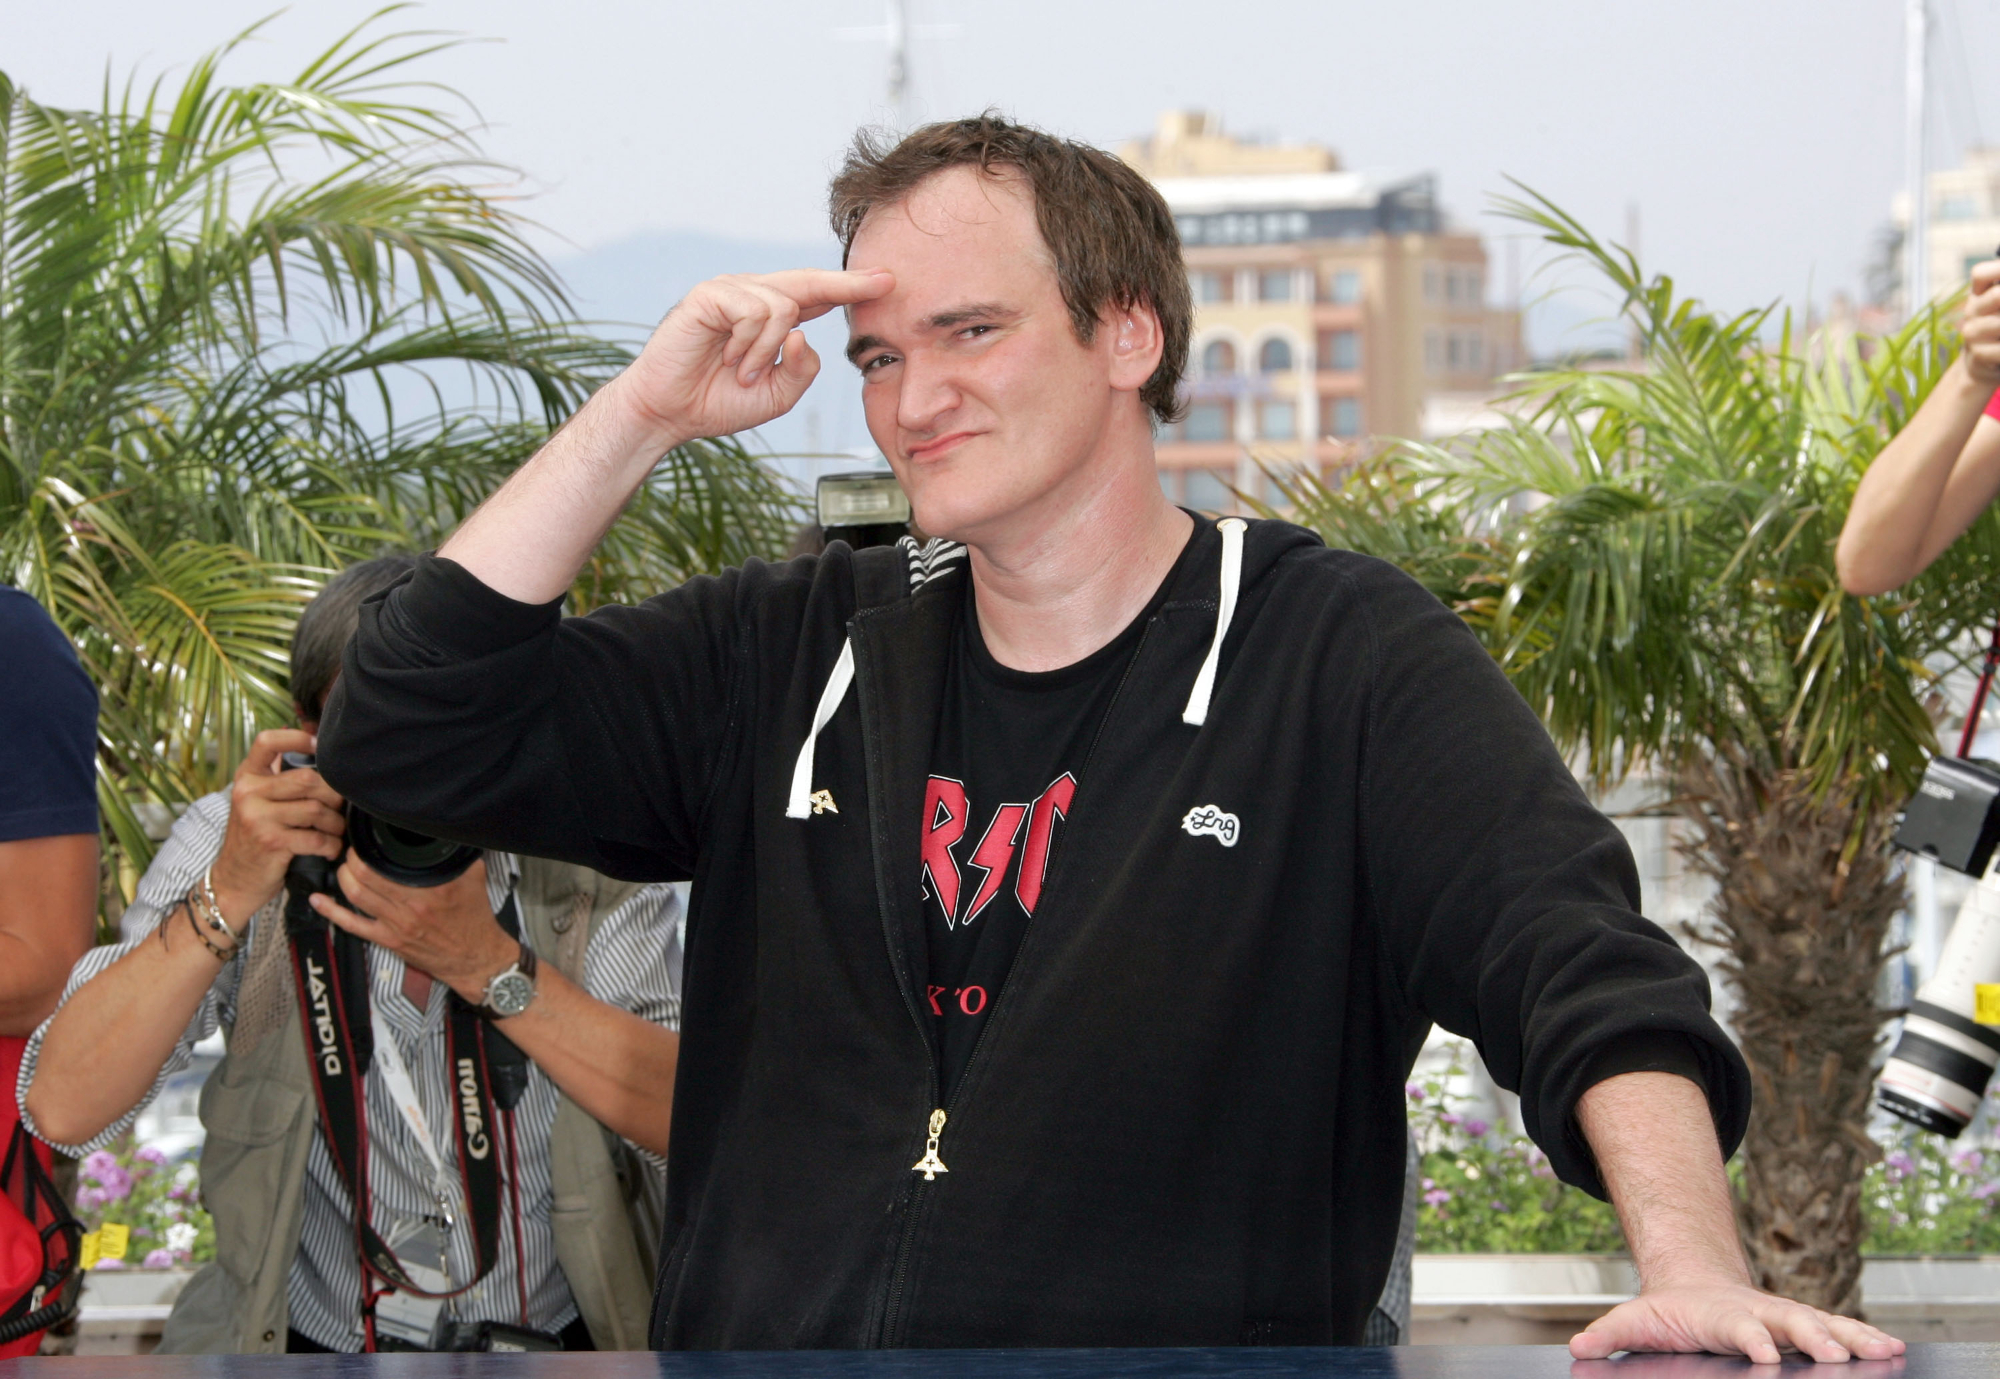 Quentin Tarantino promoting 'Death Proof' movie wearing a hoodie saluting the camera